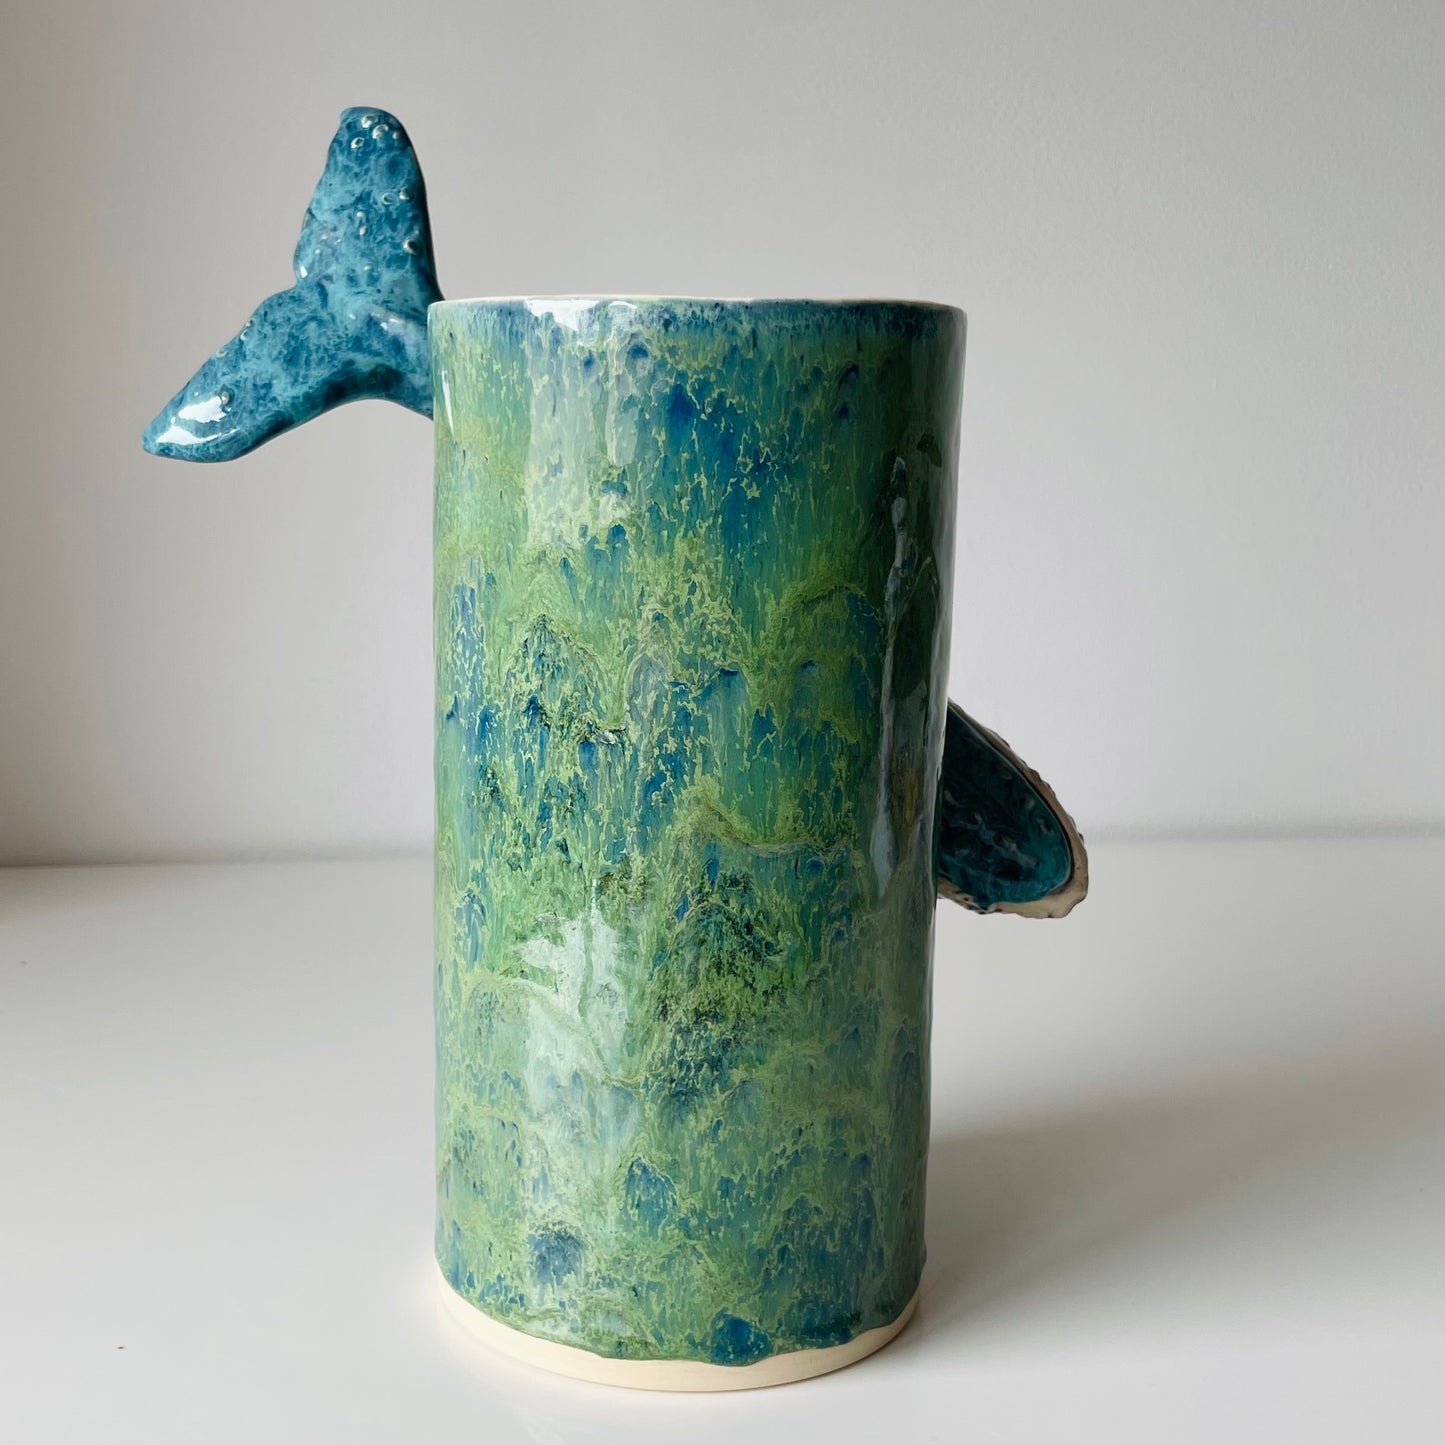 Ceramic Vase with a Whale